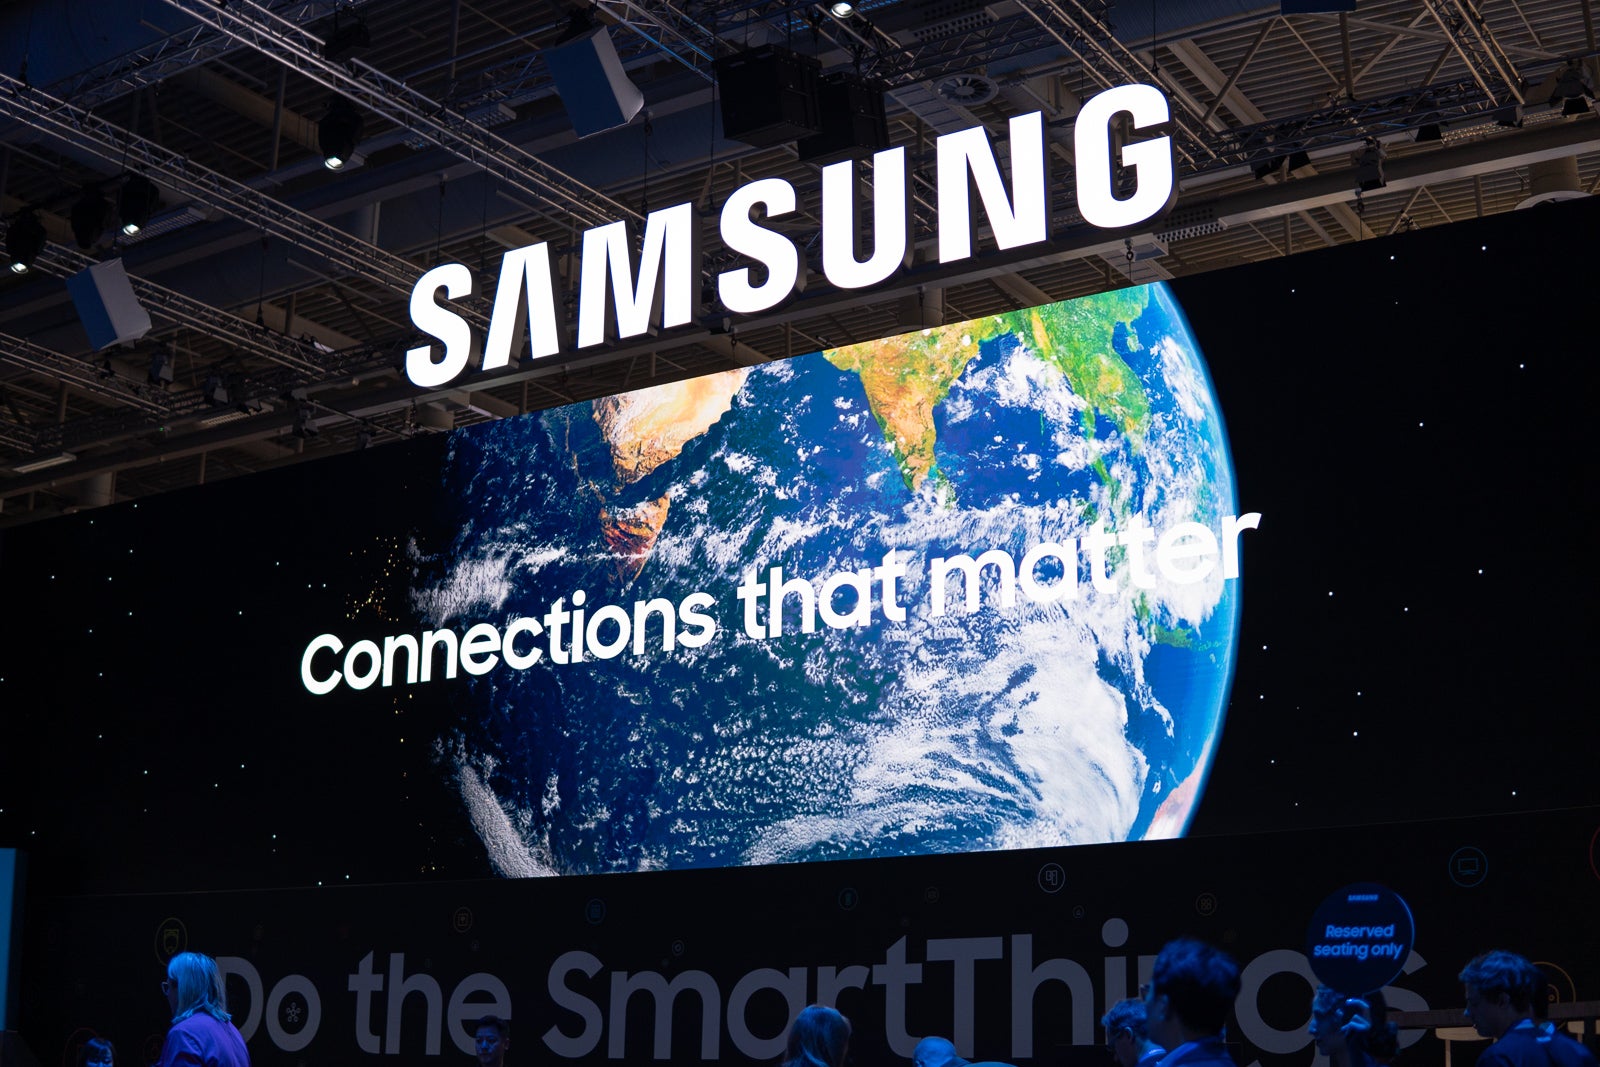 Samsung faces a lawsuit from Asus for alleged 4G and 5G patent infringement